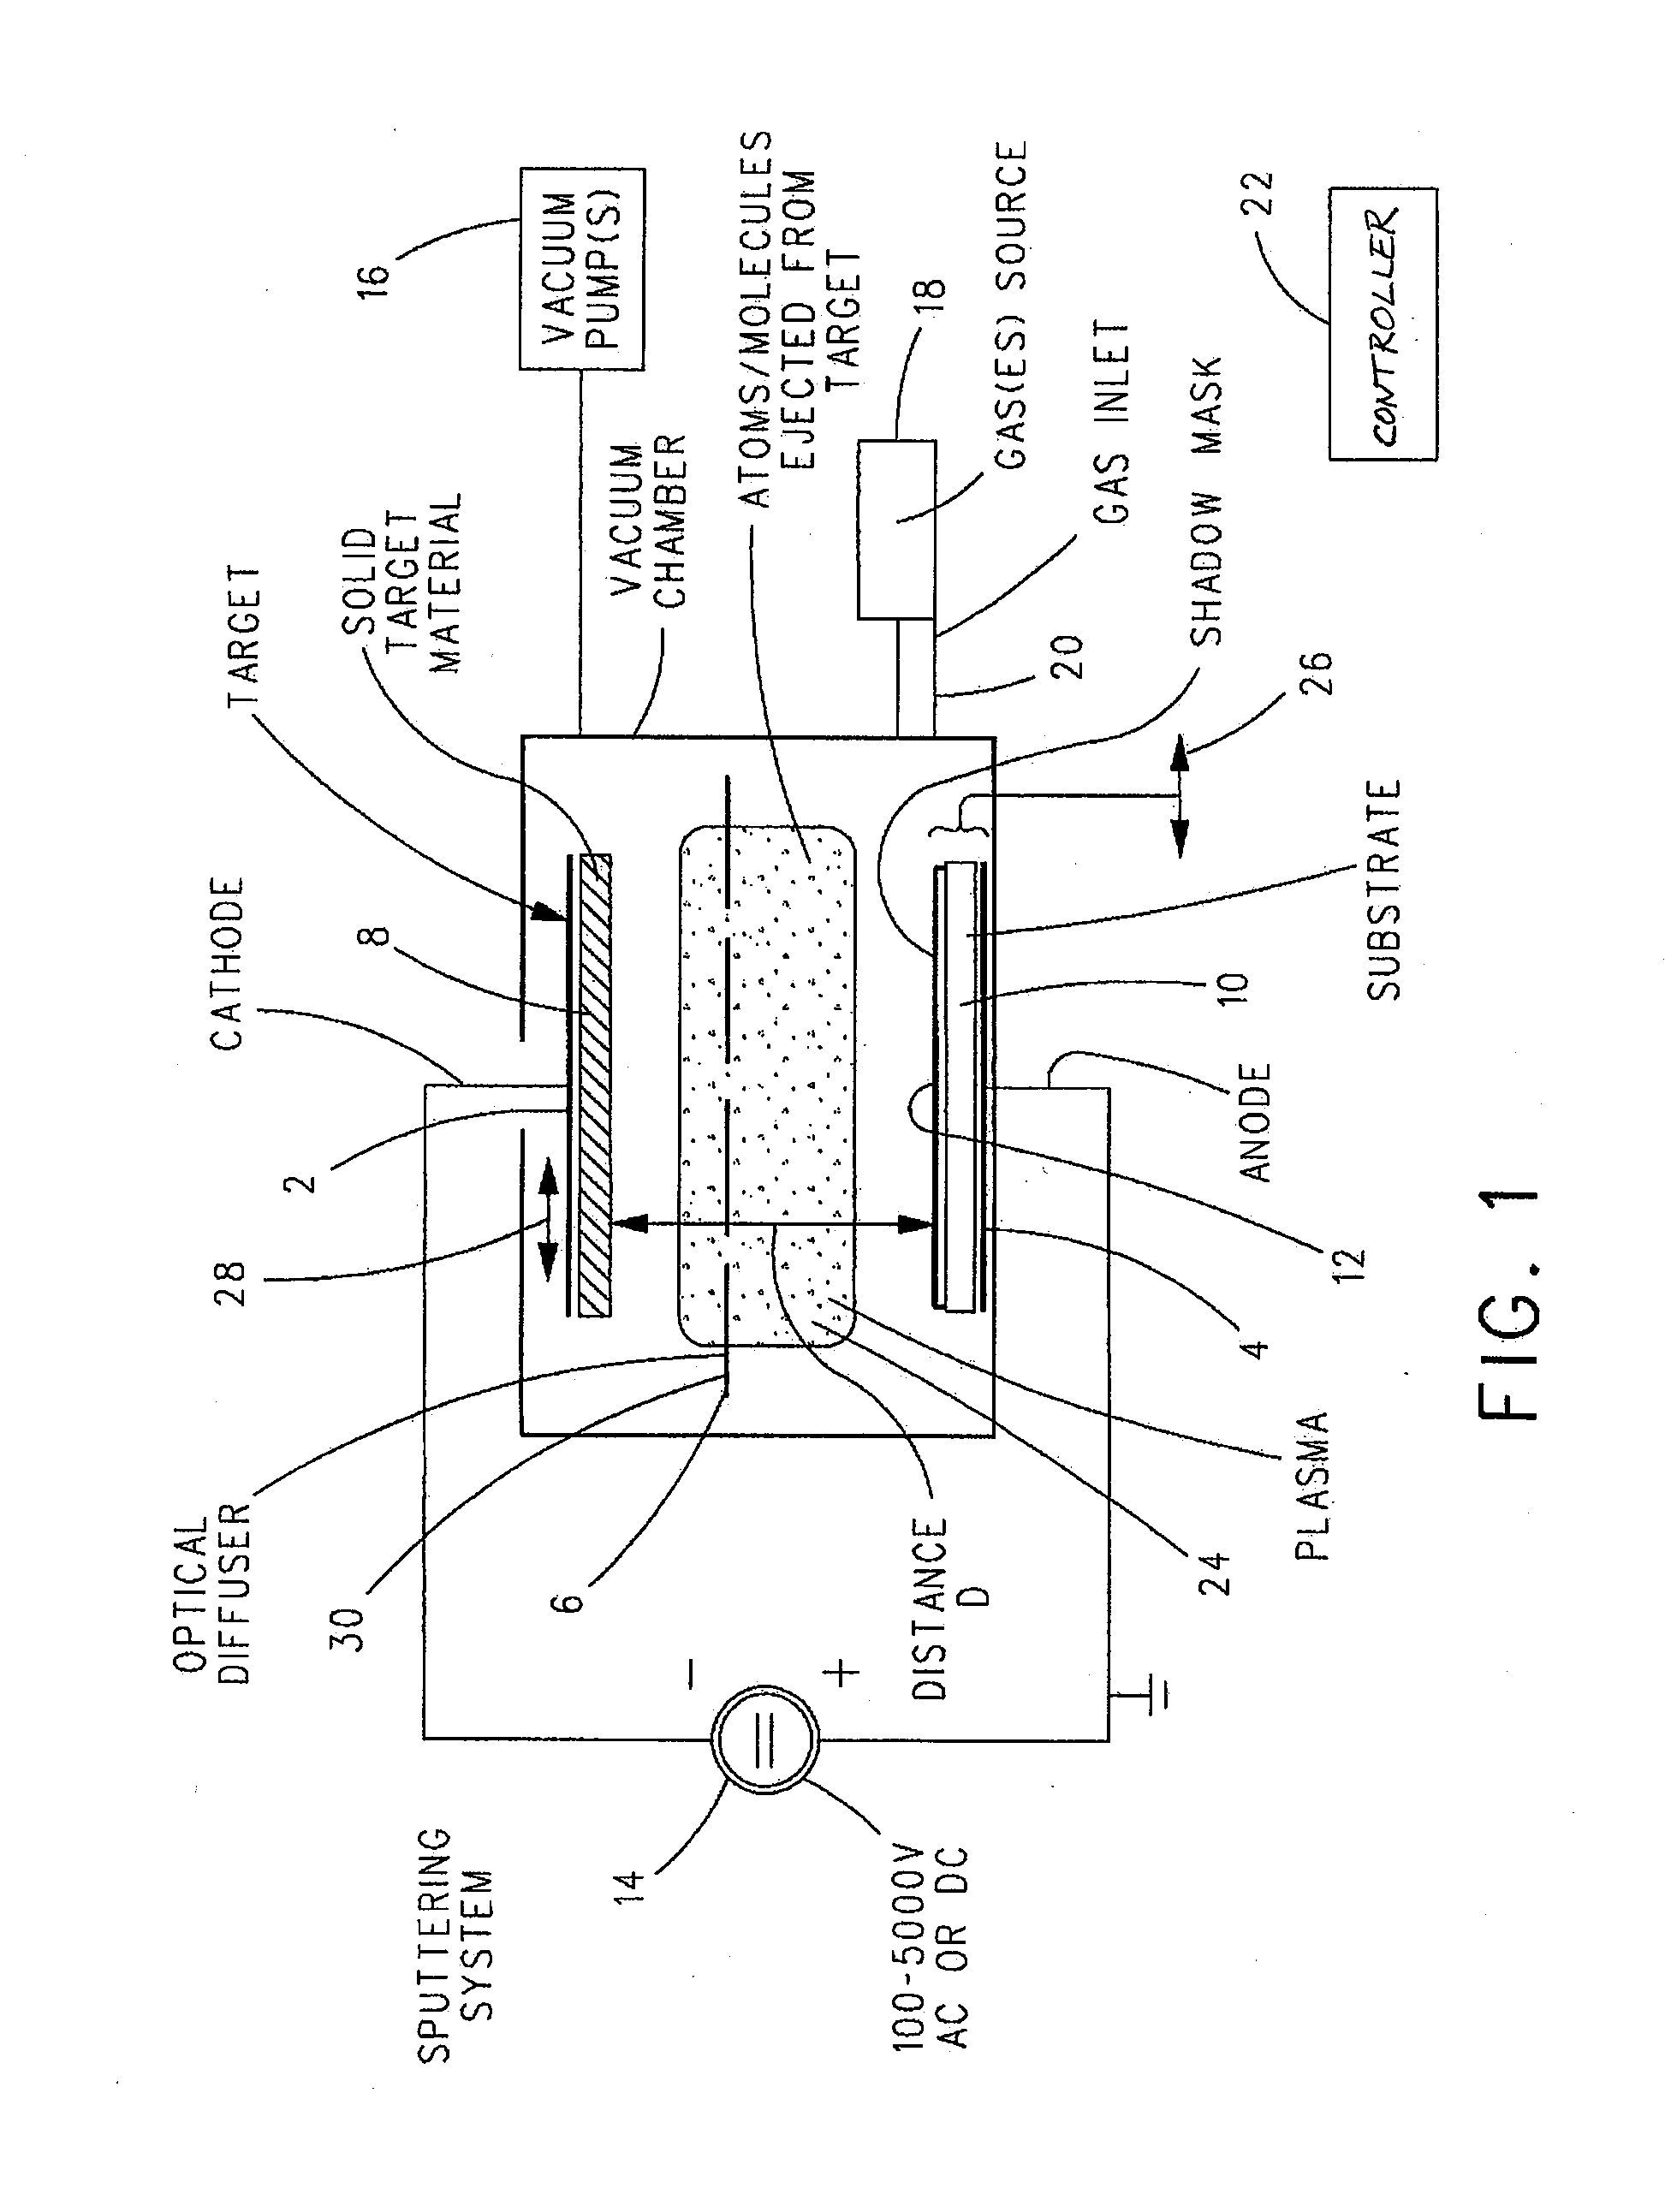 Small Feature Size Fabrication Using a Shadow Mask Deposition Process